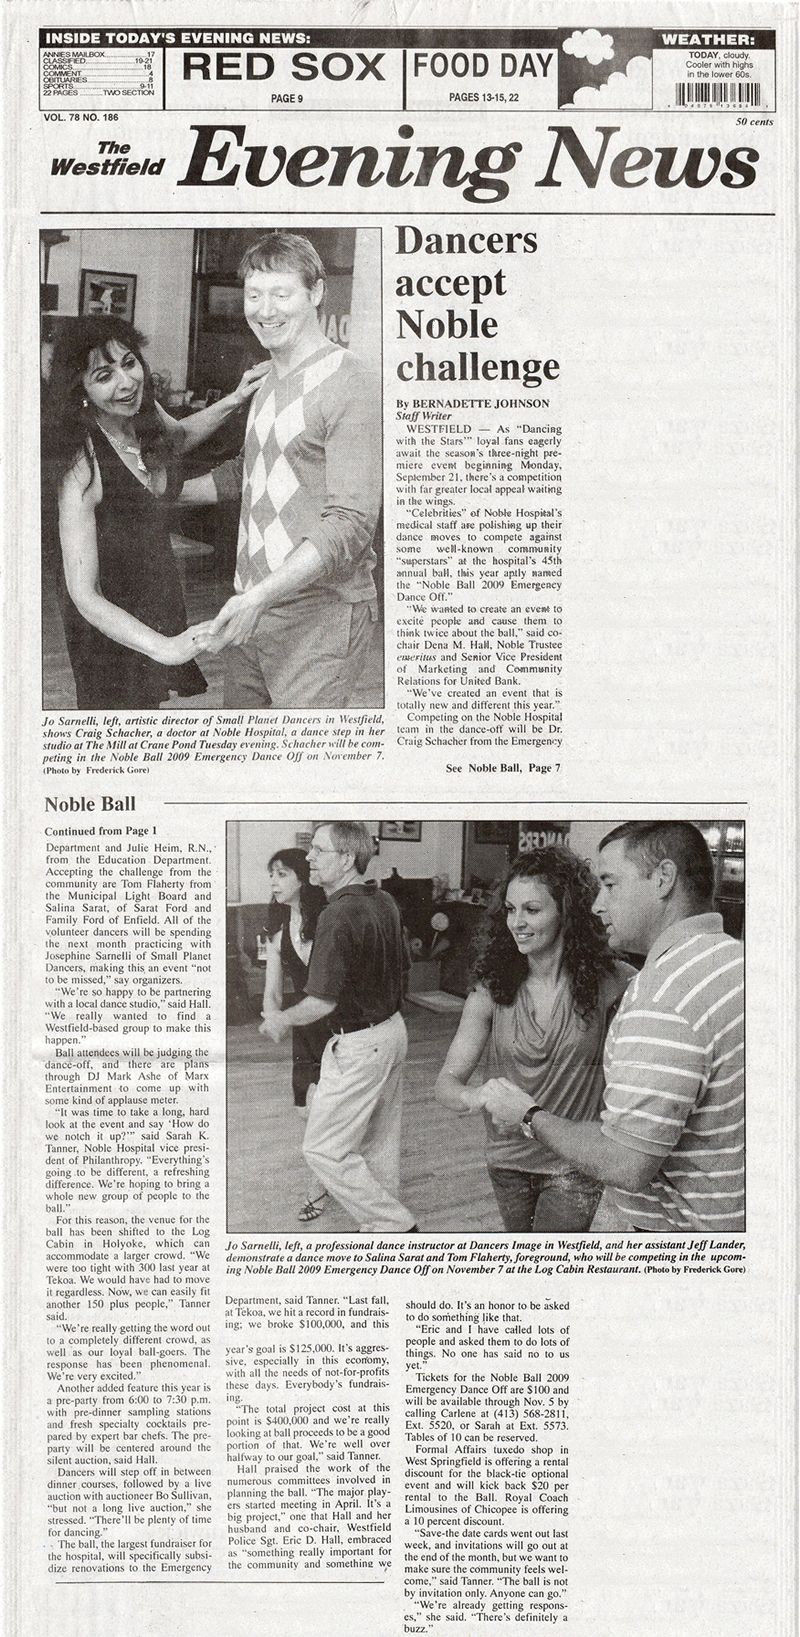 News article on the Noble Hospital Ball 2009 - Dancing with the Stars